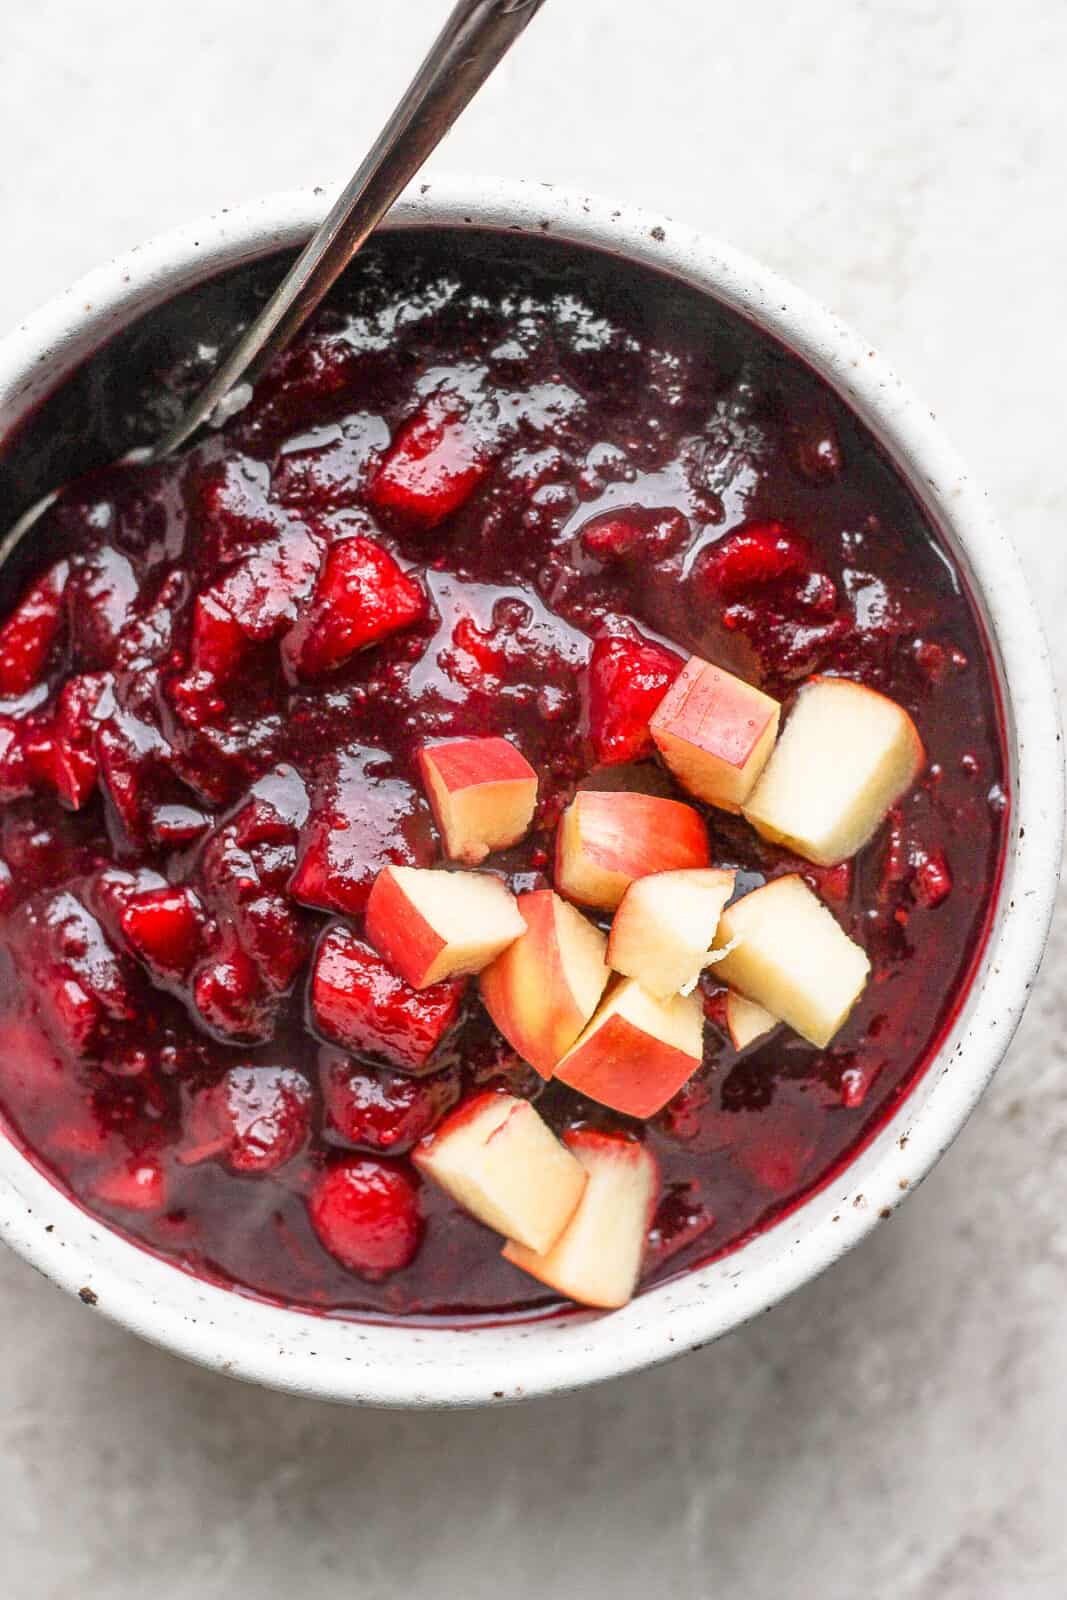 Apple cranberry sauce in a bowl.